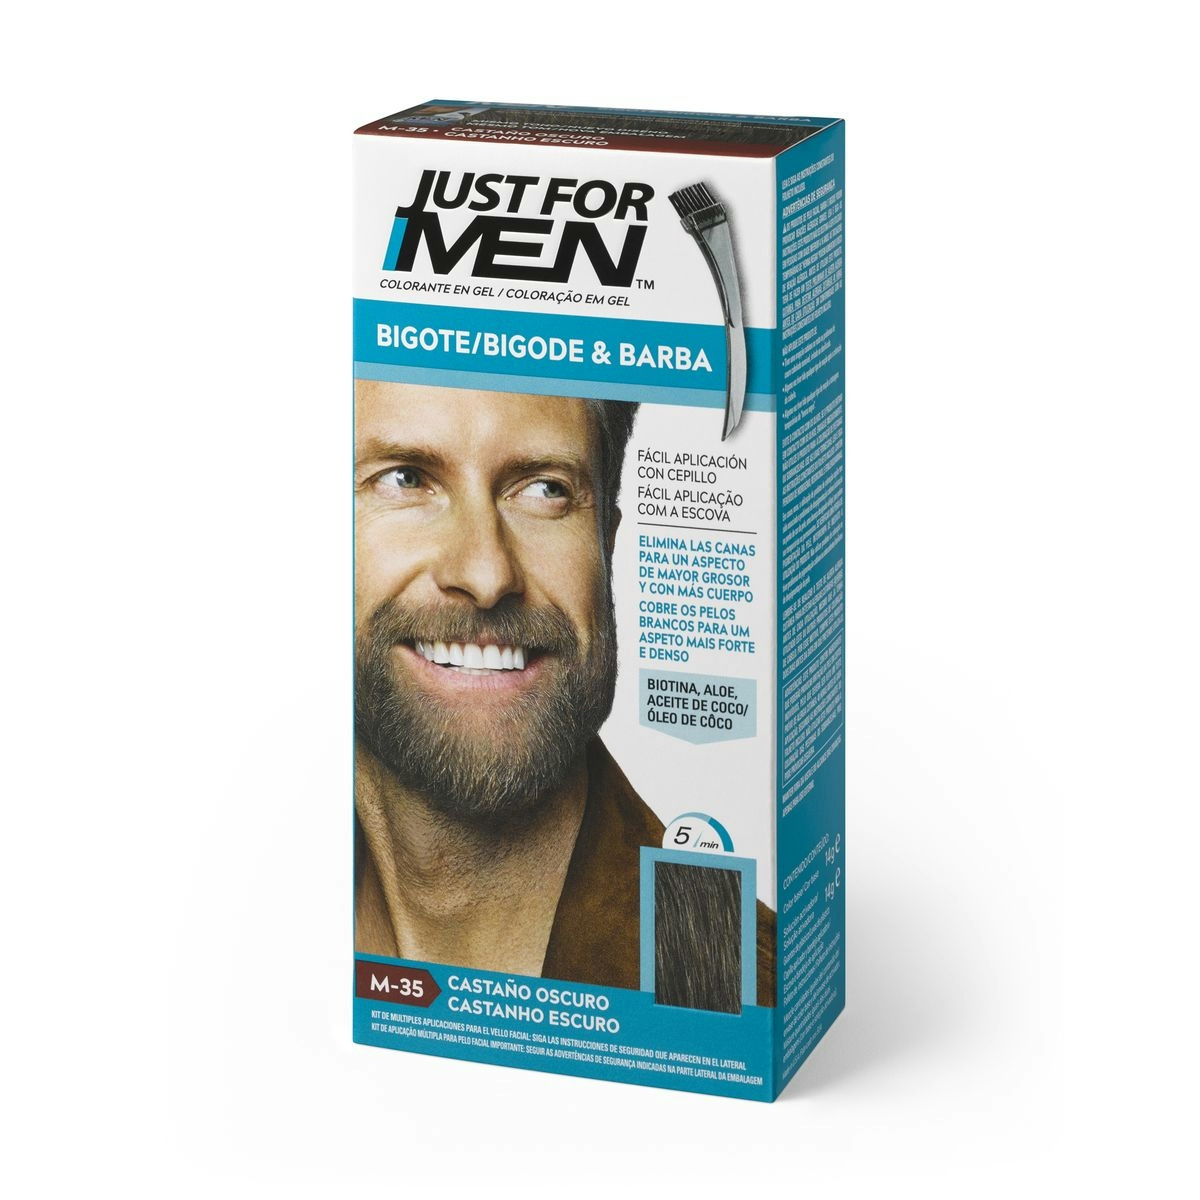 Tinte para barba Oscuro JUST FOR MEN 1 ud